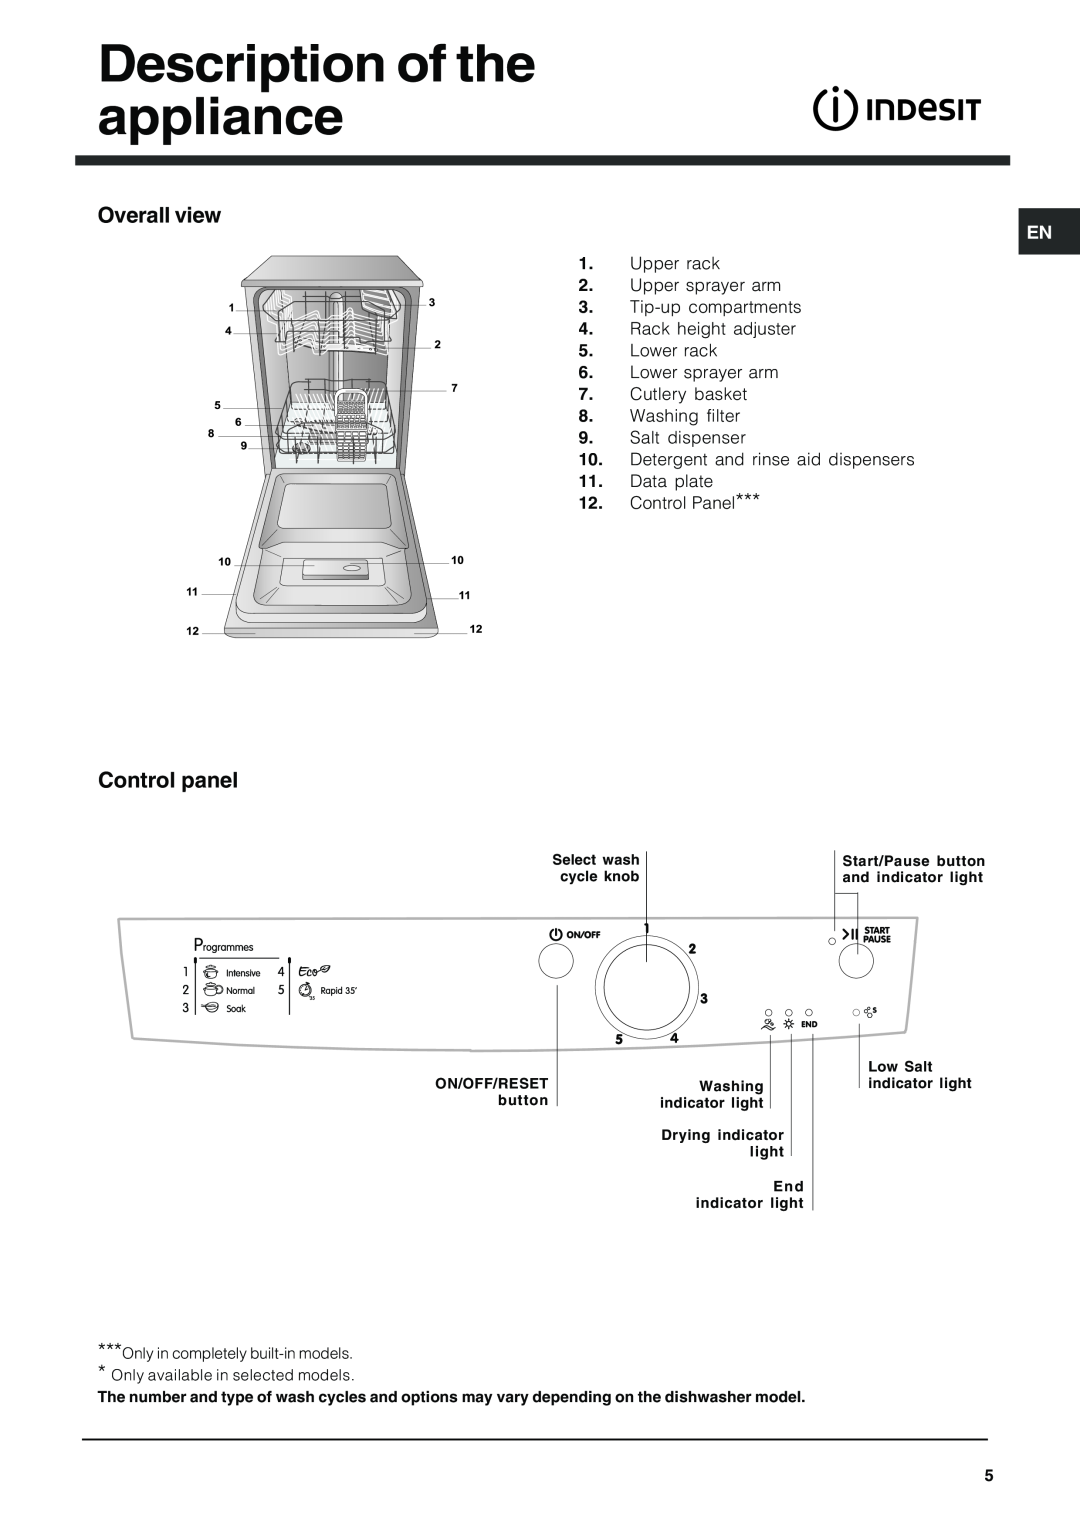 Indesit IDS 105 operating instructions Description of the appliance, Overall view, Control panel 